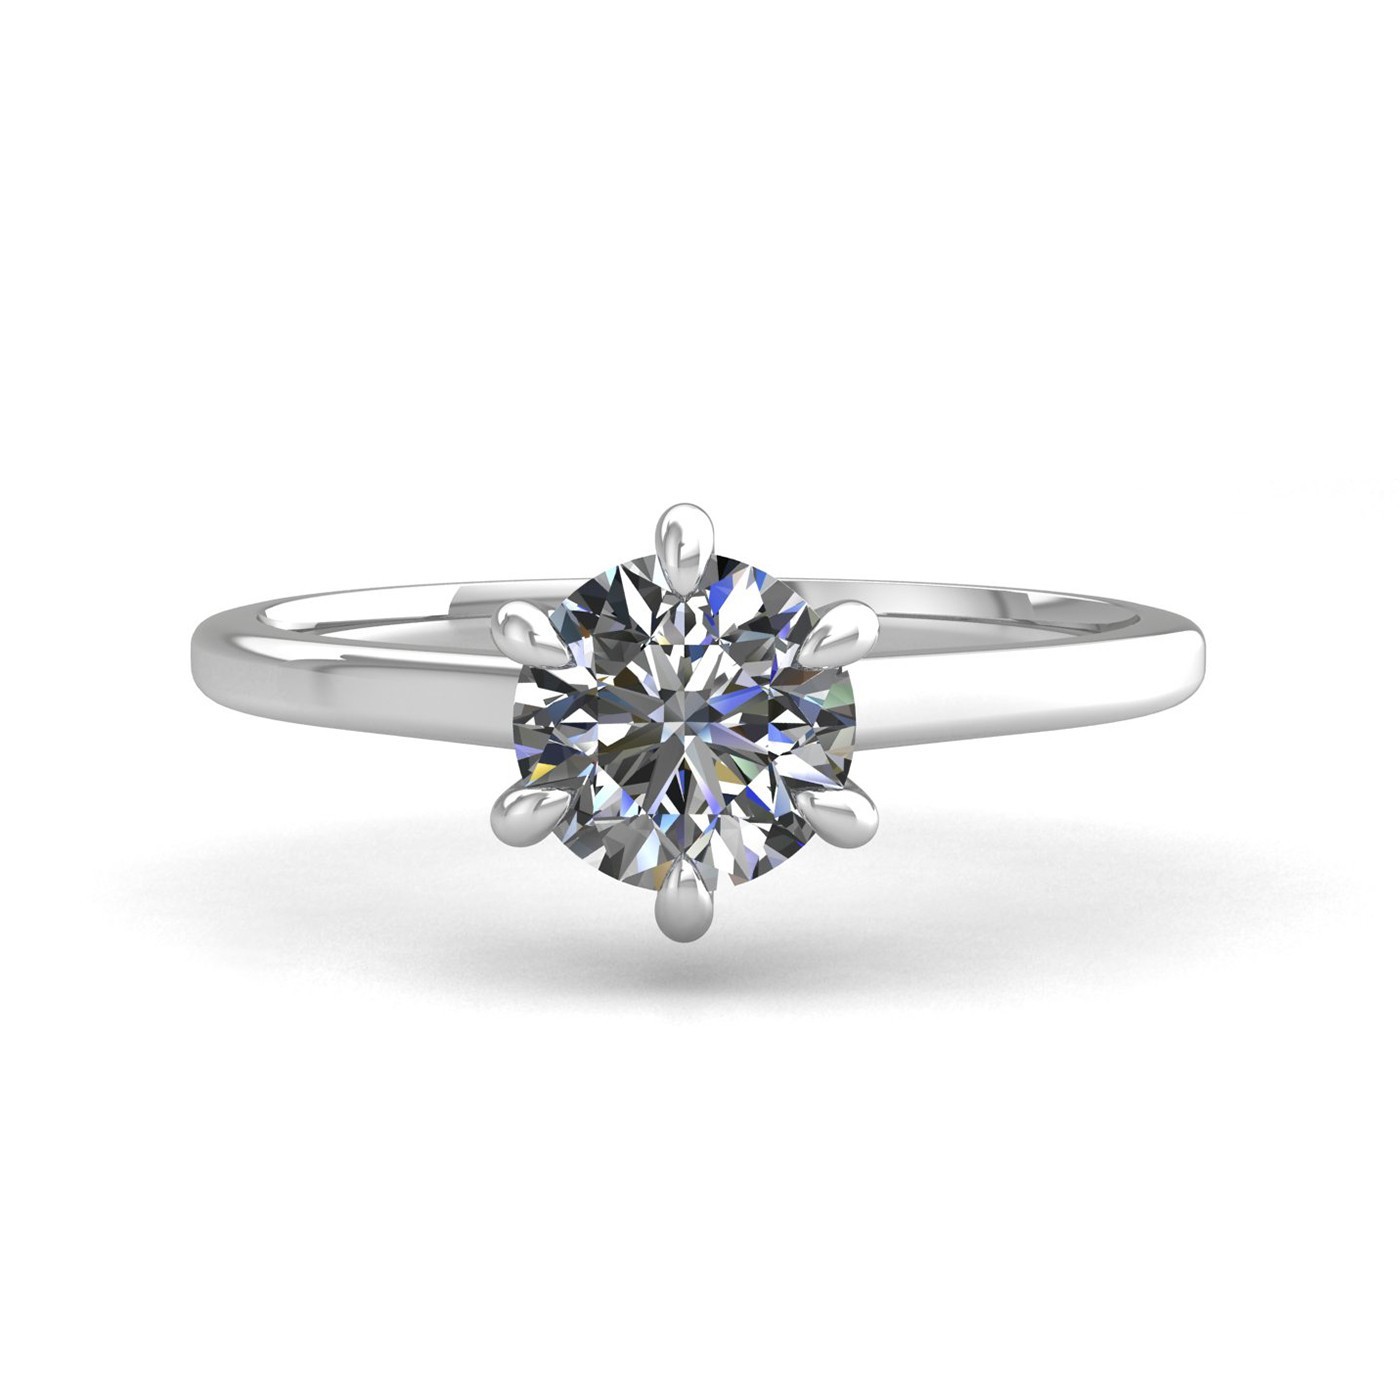 18k white gold 2,50 ct 6 prongs solitaire round cut diamond engagement ring with whisper thin band Photos & images